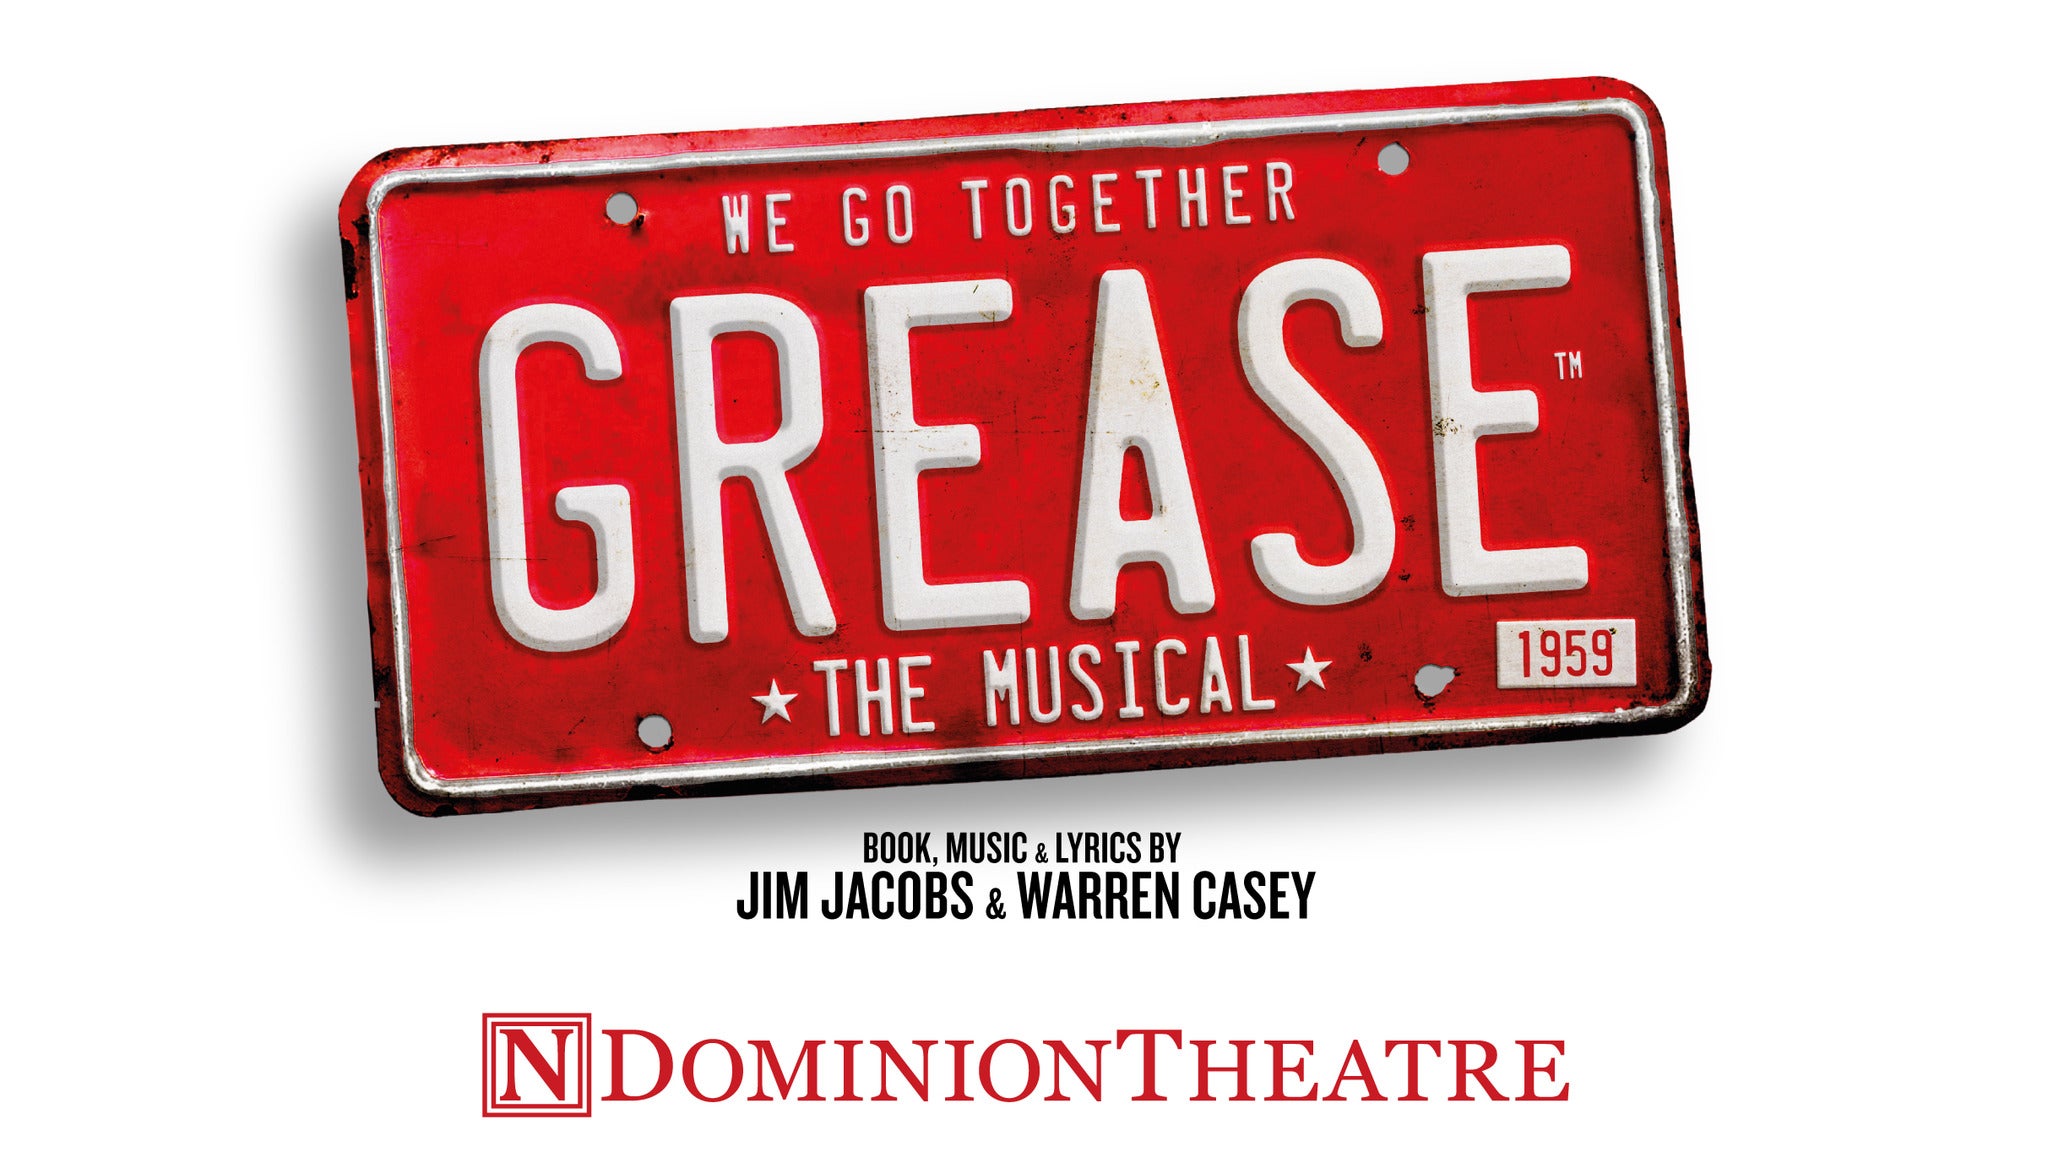 Grease the Musical Event Title Pic